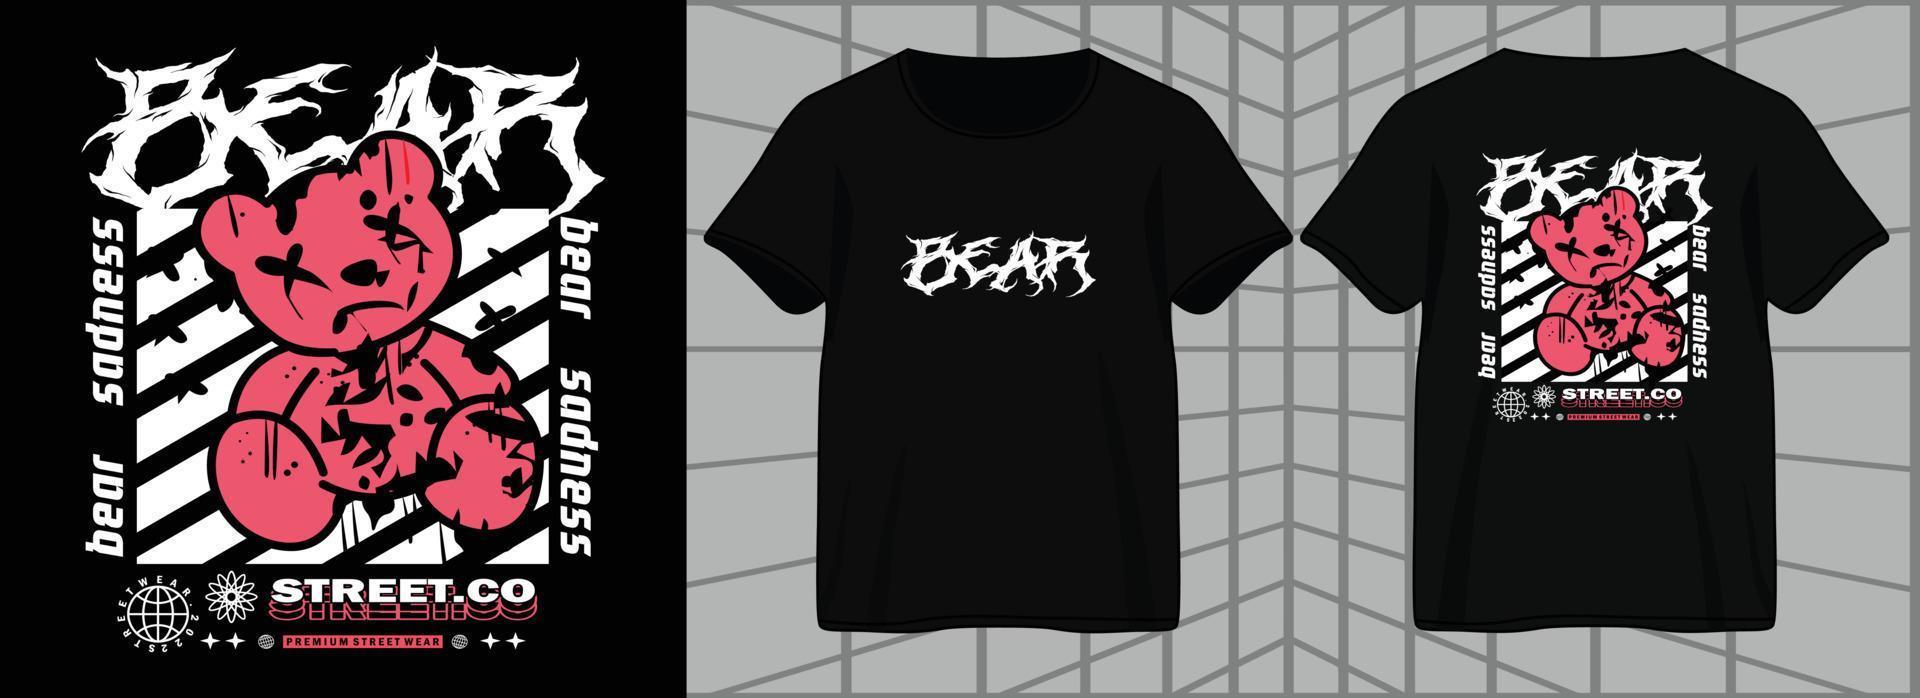 Pinky Bear Aesthetic Graphic Design for T shirt Street Wear and Urban Style vector